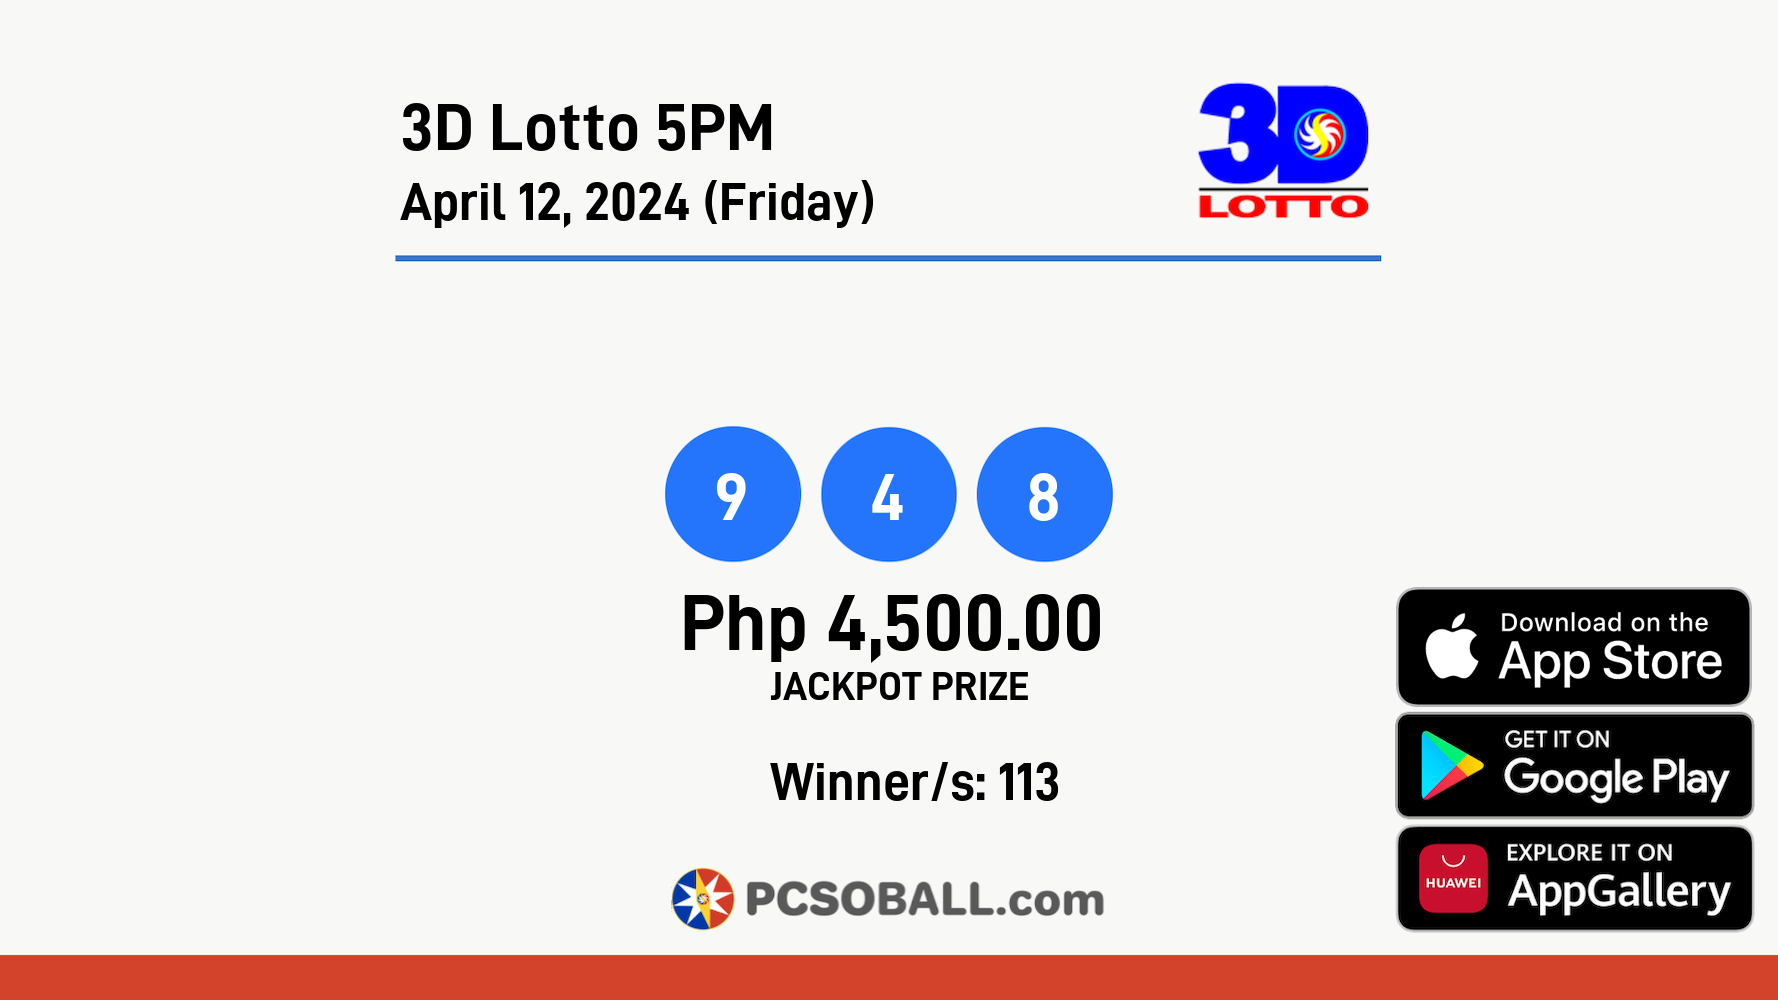 3D Lotto 5PM April 12, 2024 (Friday) Result